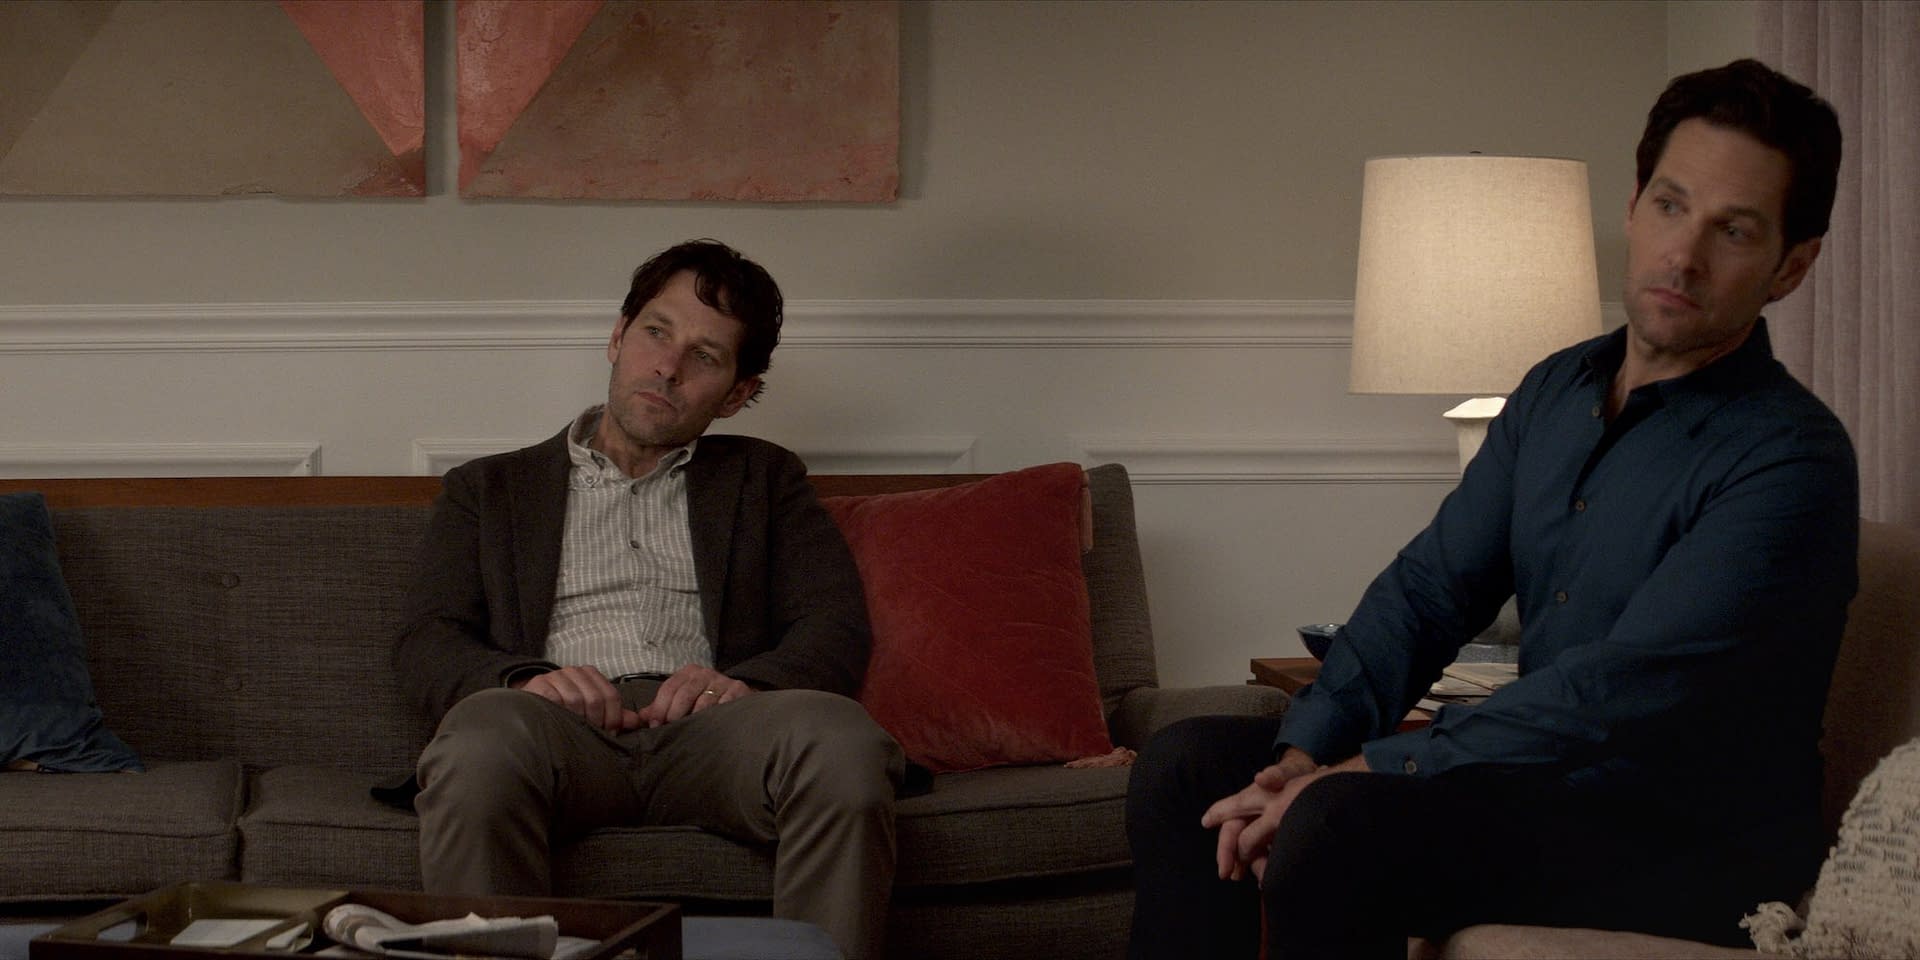 "Living With Yourself": Paul Rudd Faces His Greatest Threat Yet: Paul Rudd [PREVIEW IMAGES]